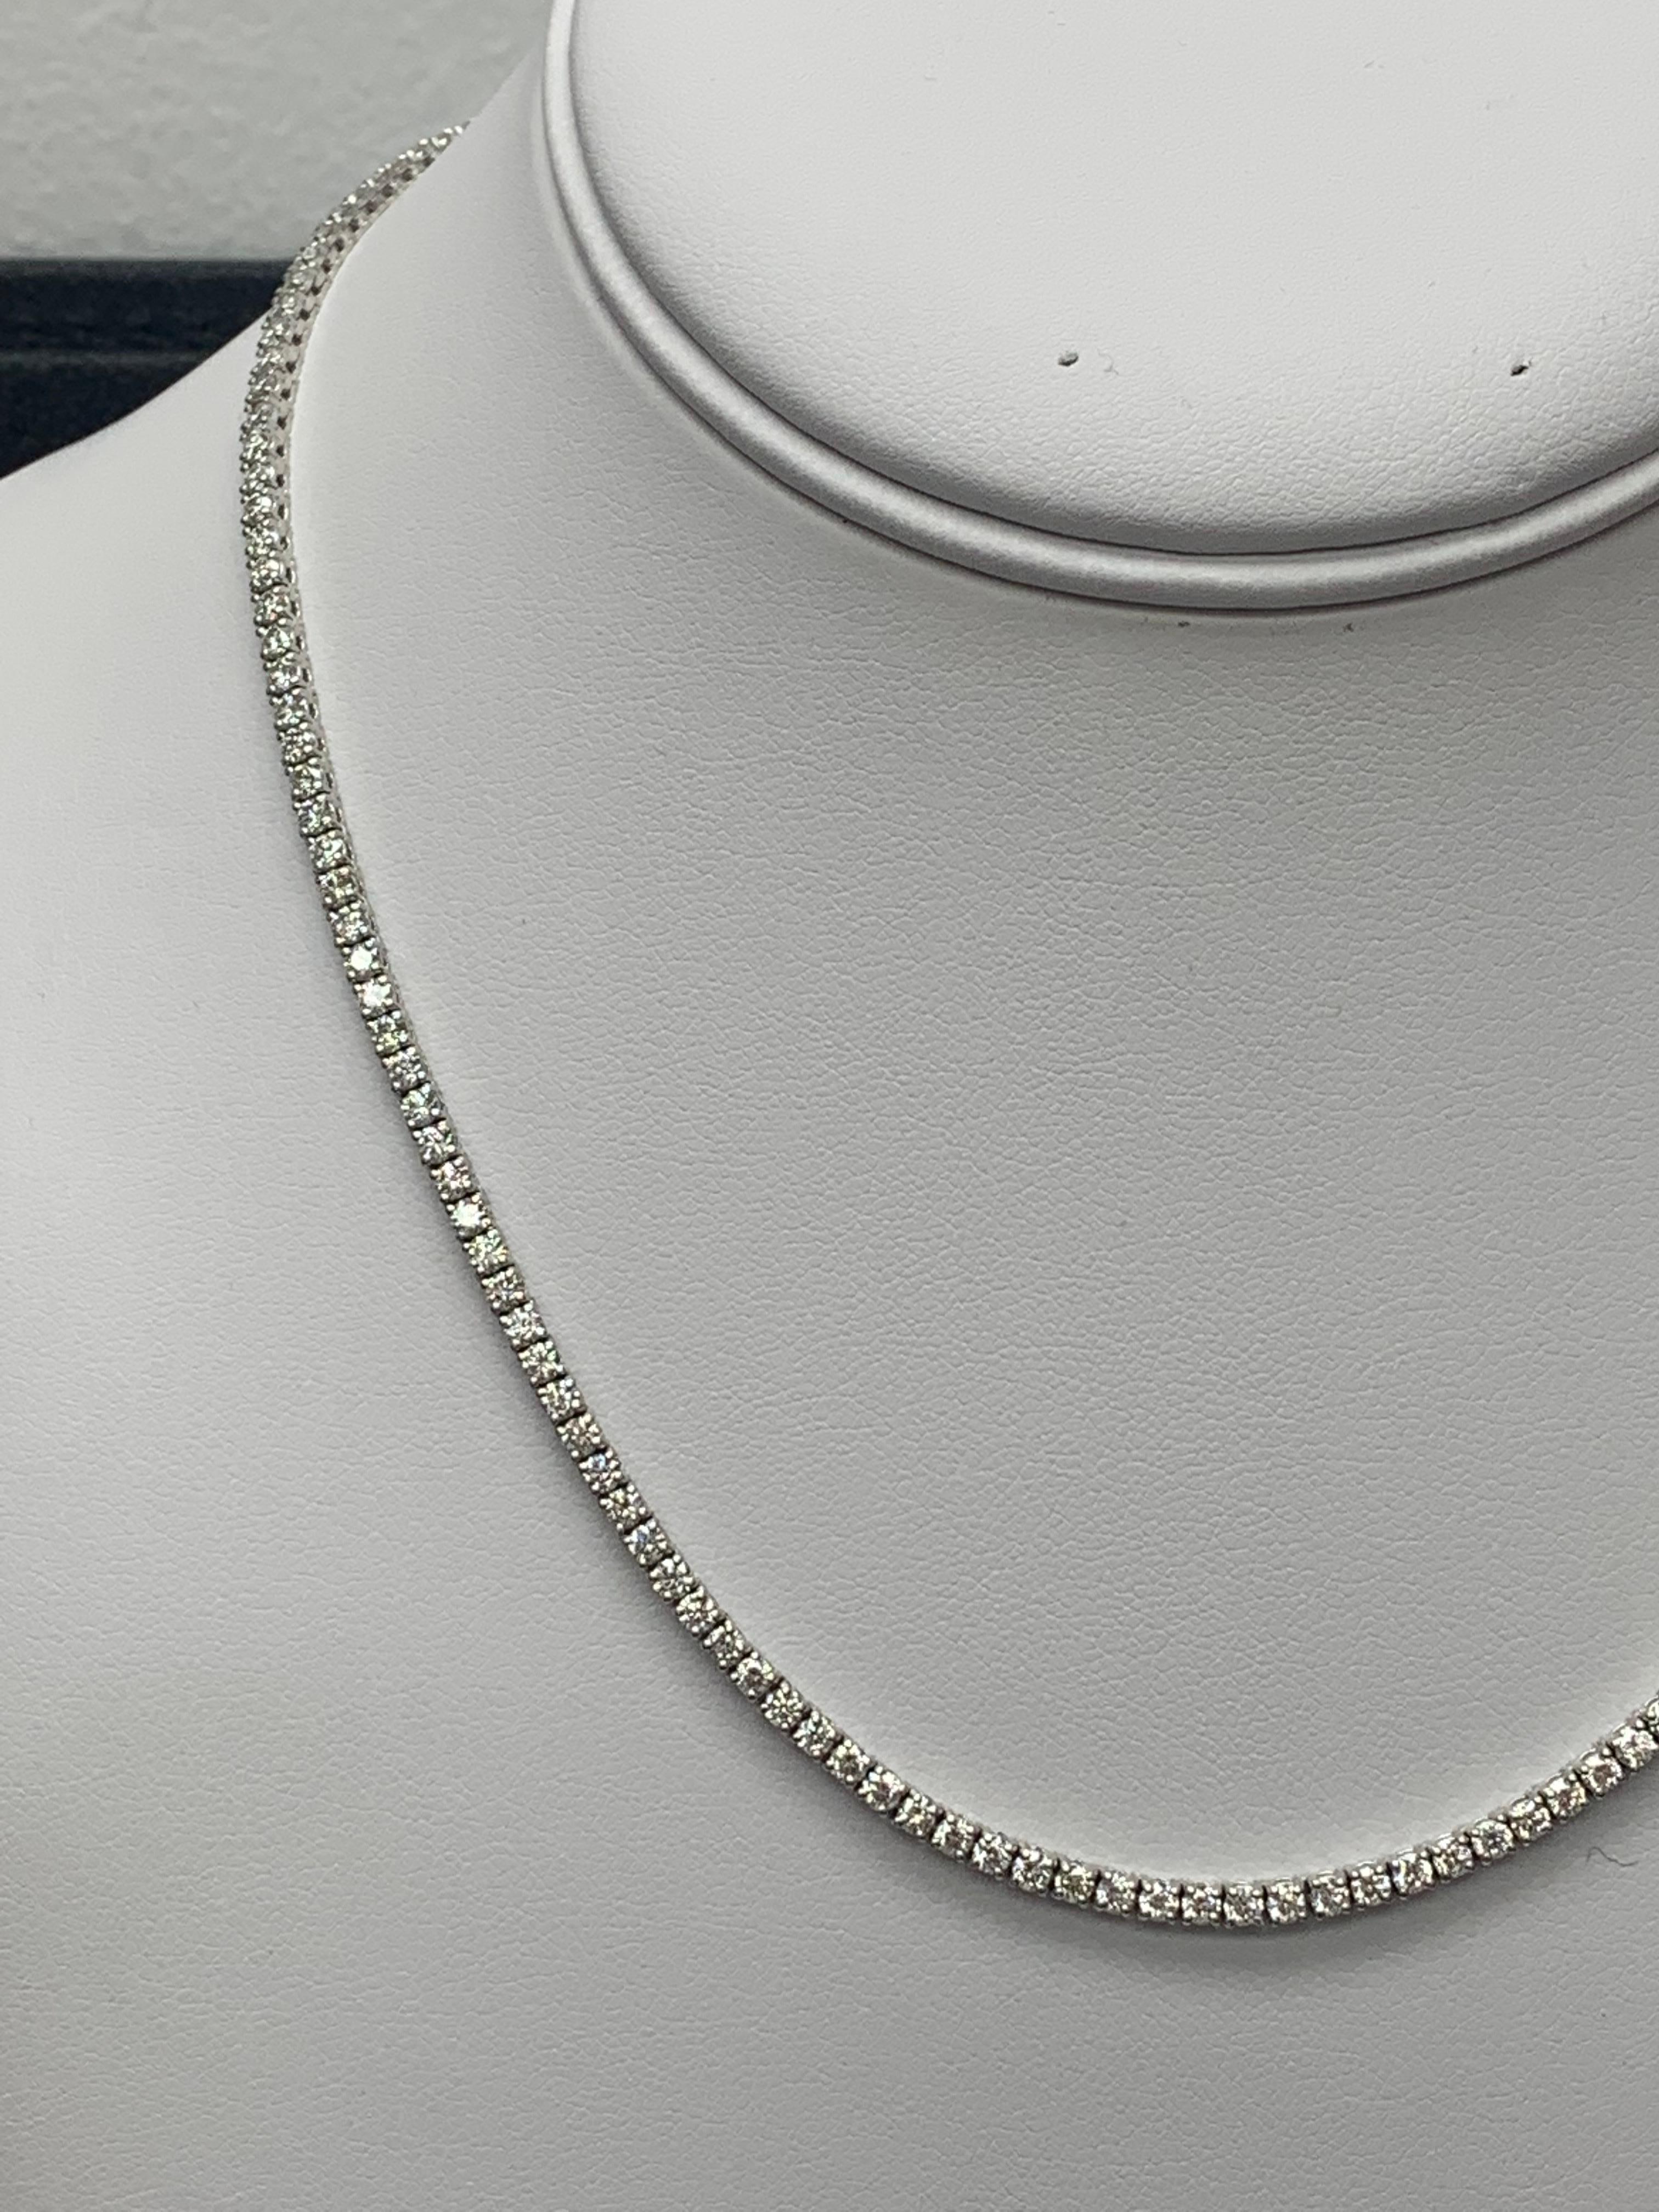 Modern 8.01 Carat Diamond Tennis Necklace in 14K White Gold For Sale